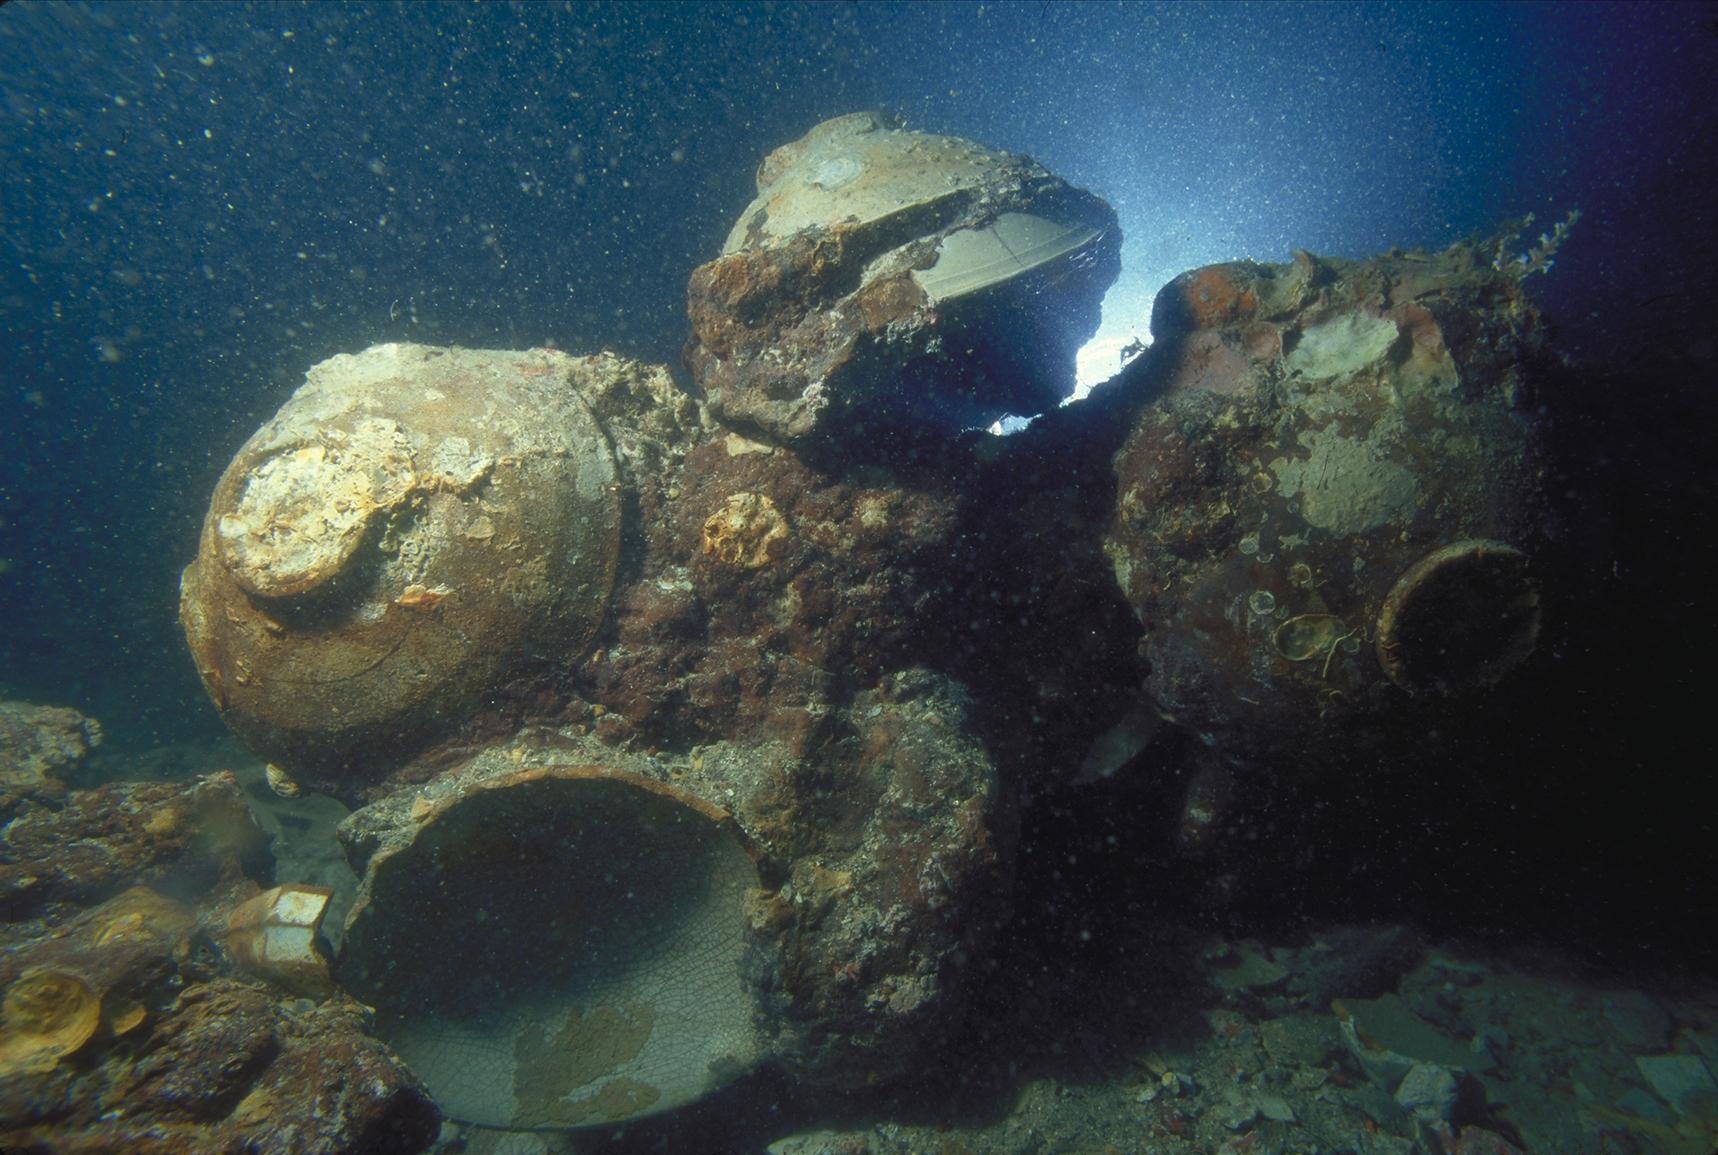 Chinese ceramic bowls at the site of the Java Sea shipwreck site in Indonesia. (Pacific Sea Resources / The Field Museum)